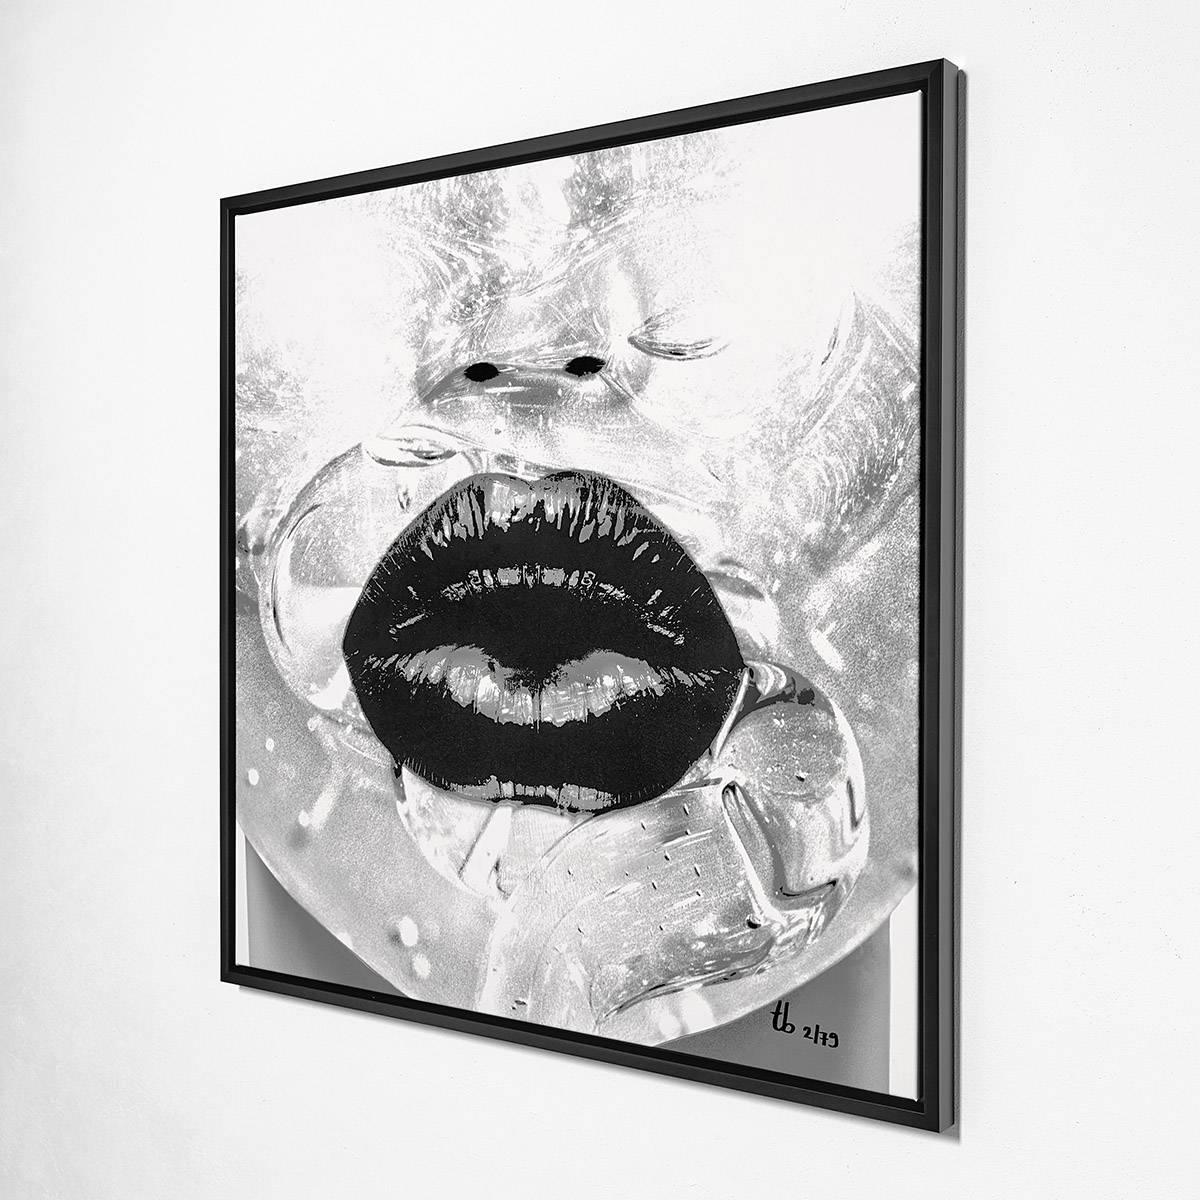 Too Much Talk II  - Limited Platinum Edition of 149 - Contemporary Photograph by Thomas Bijen